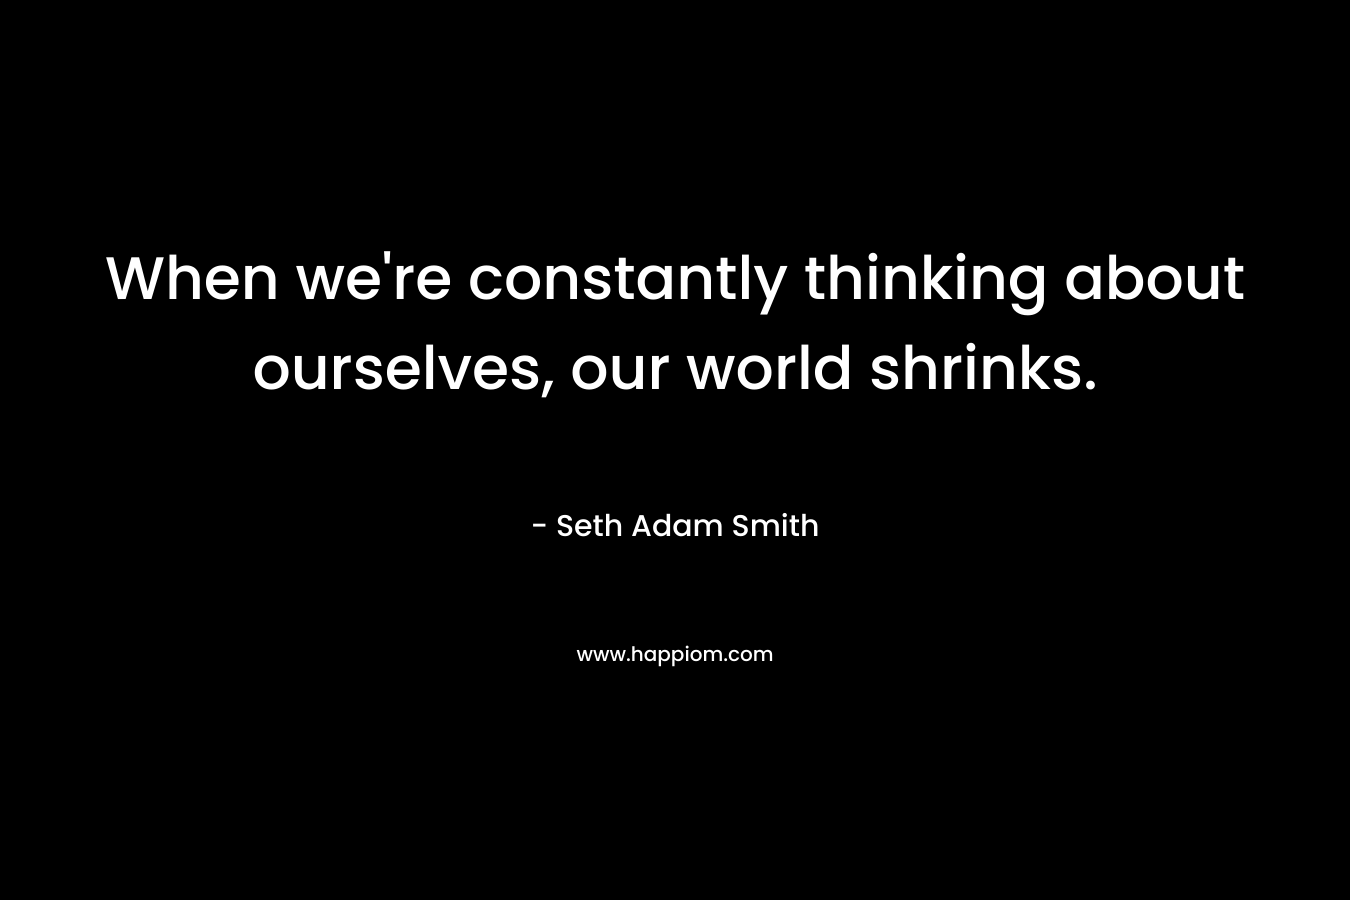 When we're constantly thinking about ourselves, our world shrinks.